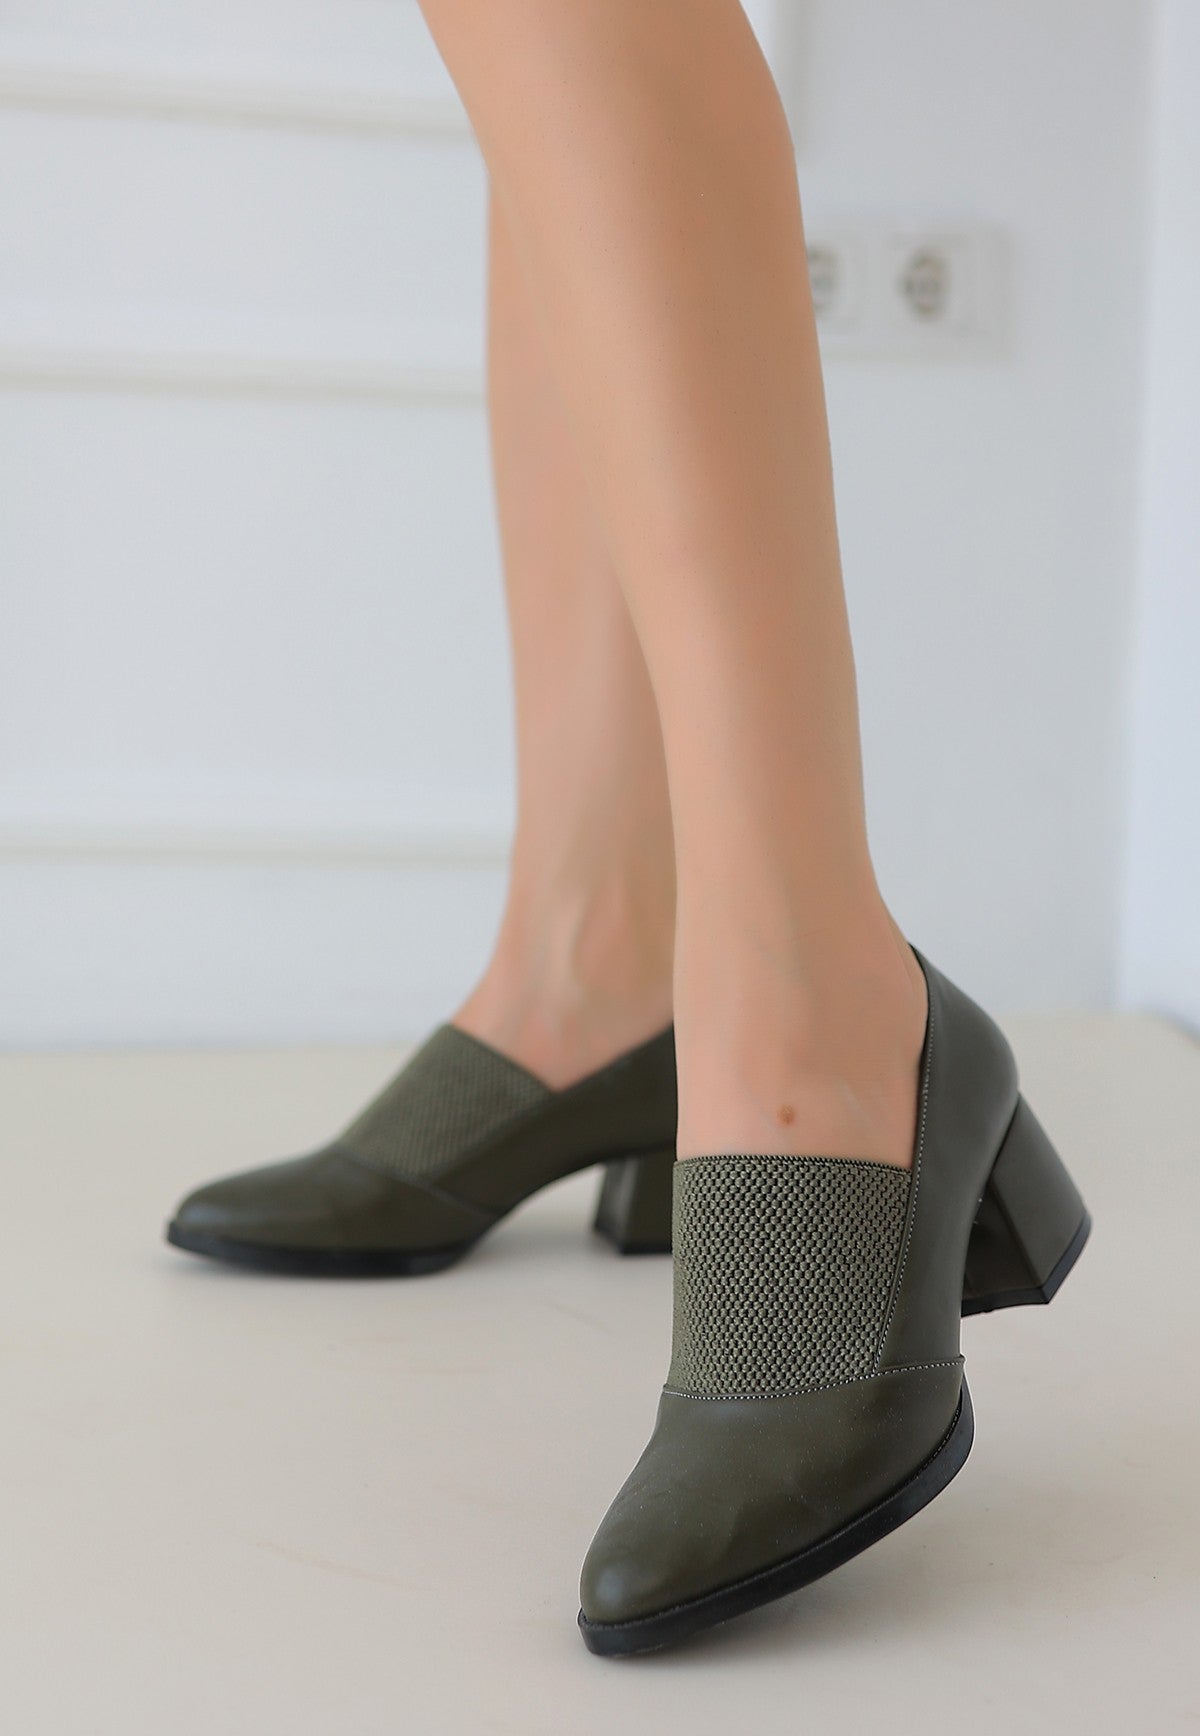 Women's Green Leather Heeled Shoes - STREETMODE™